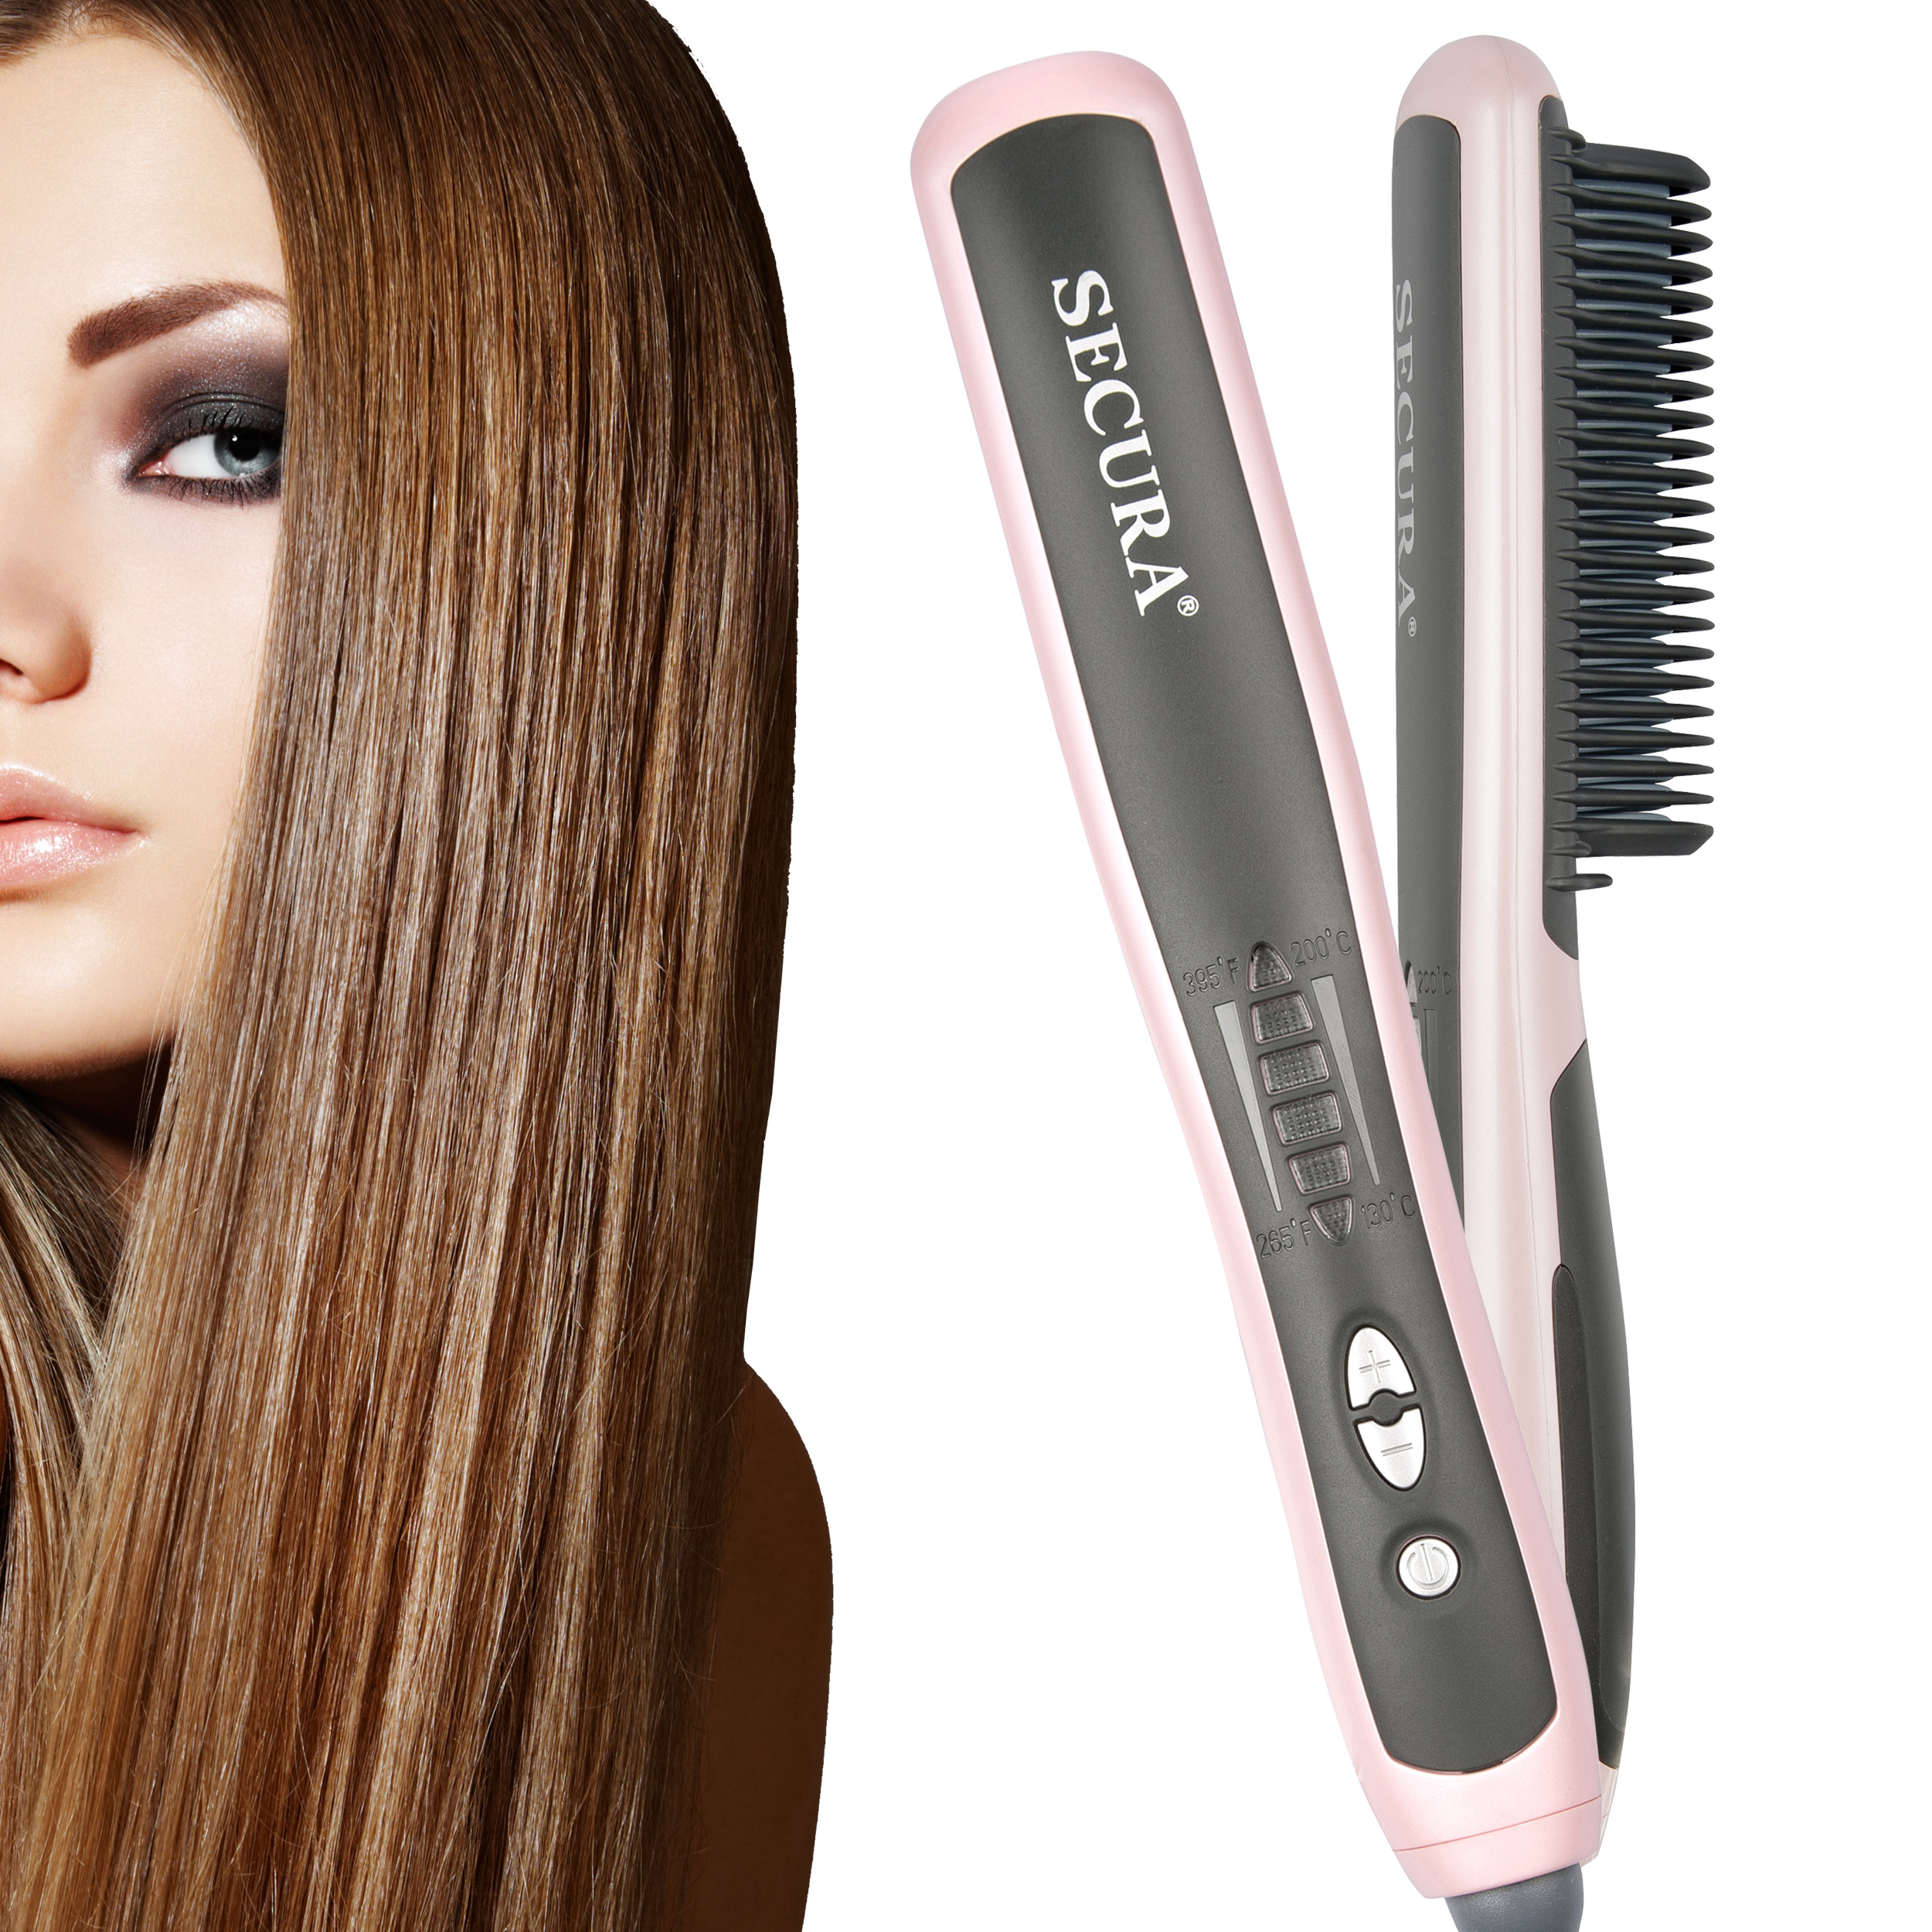 Secura Hair Straightener Comb with PTC Ceramic Heating Elements and 6  Levels of Temperature Control - Model:SC-6L - The Secura